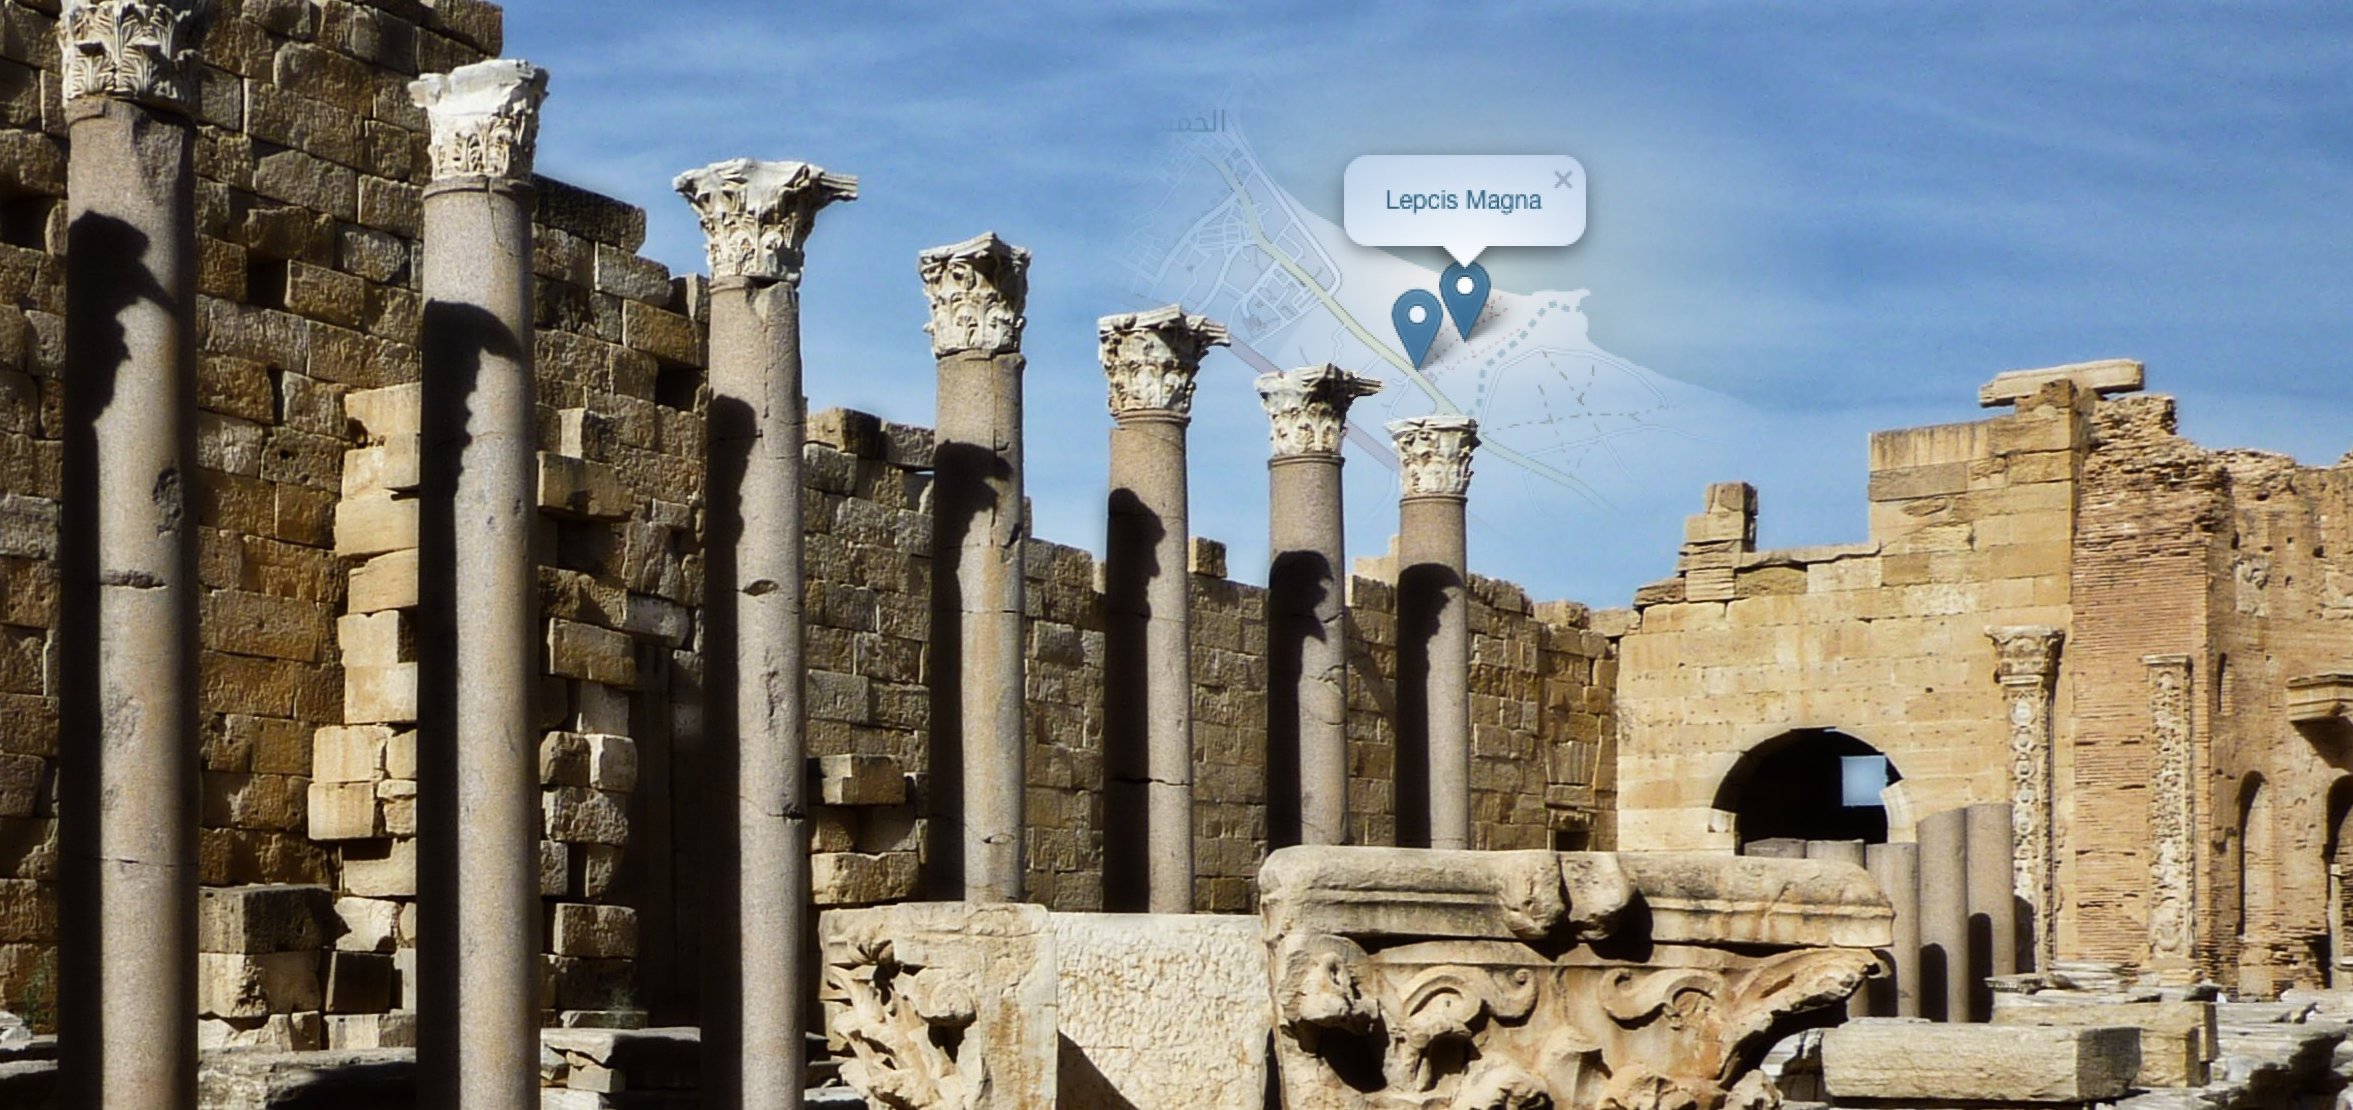 Ancient ruins of arches and building structures with a 'Leptis Magna' location marker overlay with a map